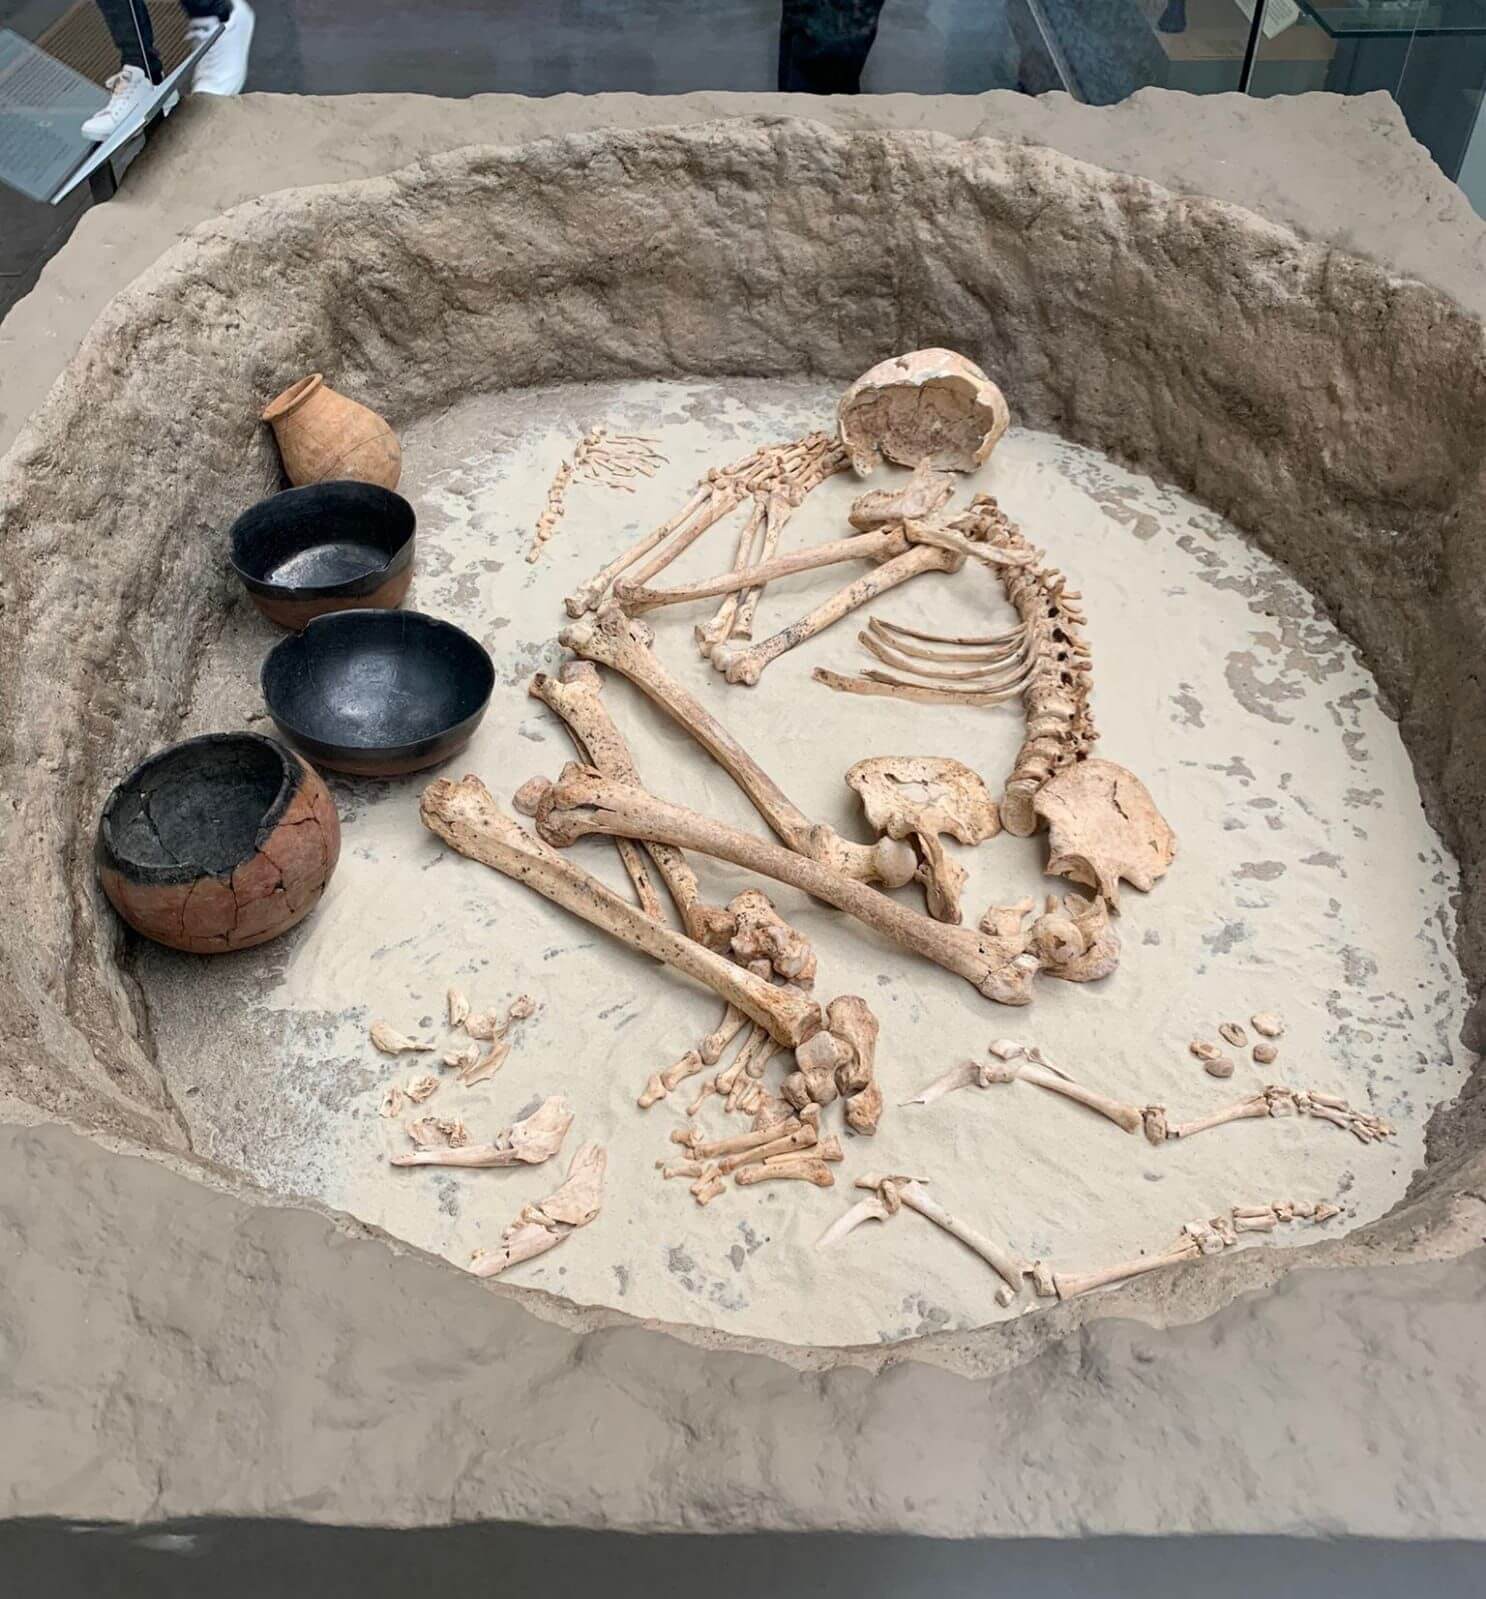 A skeleton is lying down in a fetal position in a wider circular stone pit. To the left of the skeleton is two ceramic bowls, one ceramic jug, and a cracked ceramic bowl. Surround the skeleton by its\' feet and head are other smaller bones from animal parts.